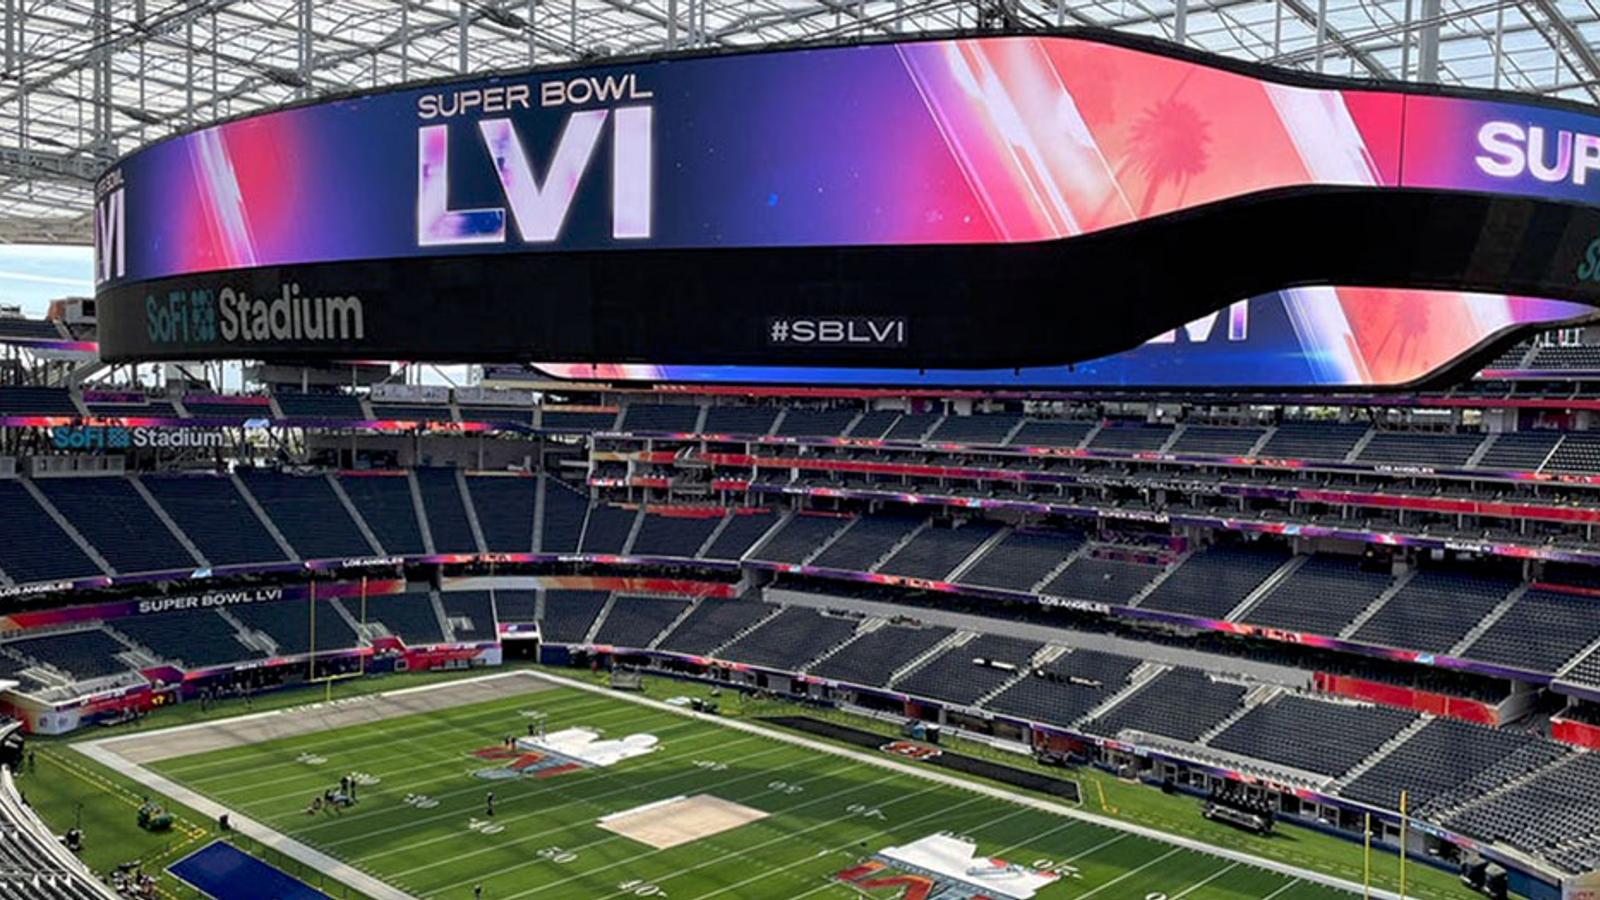 super bowl ticket prices dropping